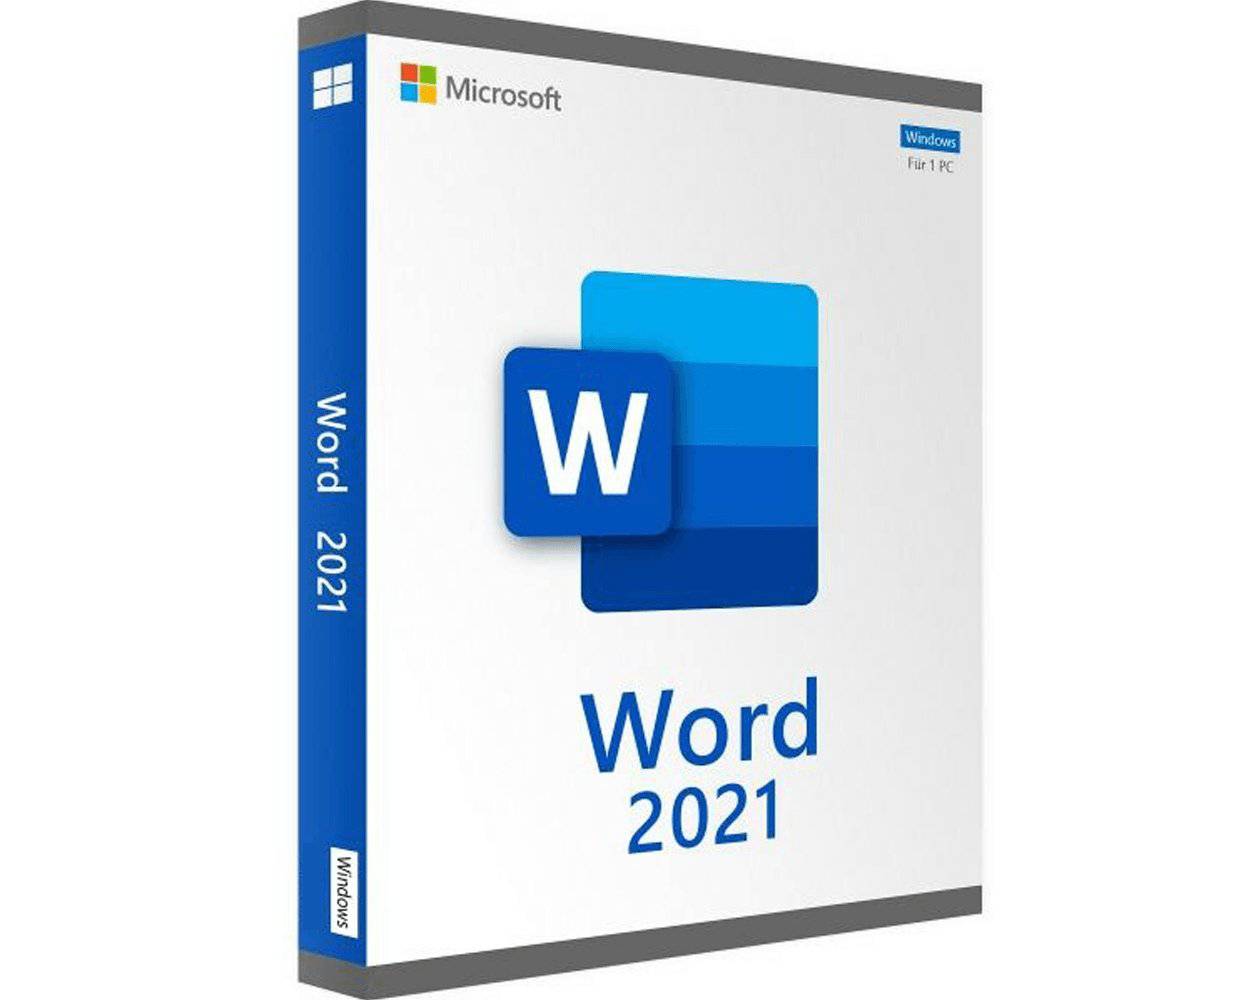 Microsoft Word 2021 | License Activation Key for 1 PC or MAC | Full Version | Australian Stock - INFINITE-ITECH